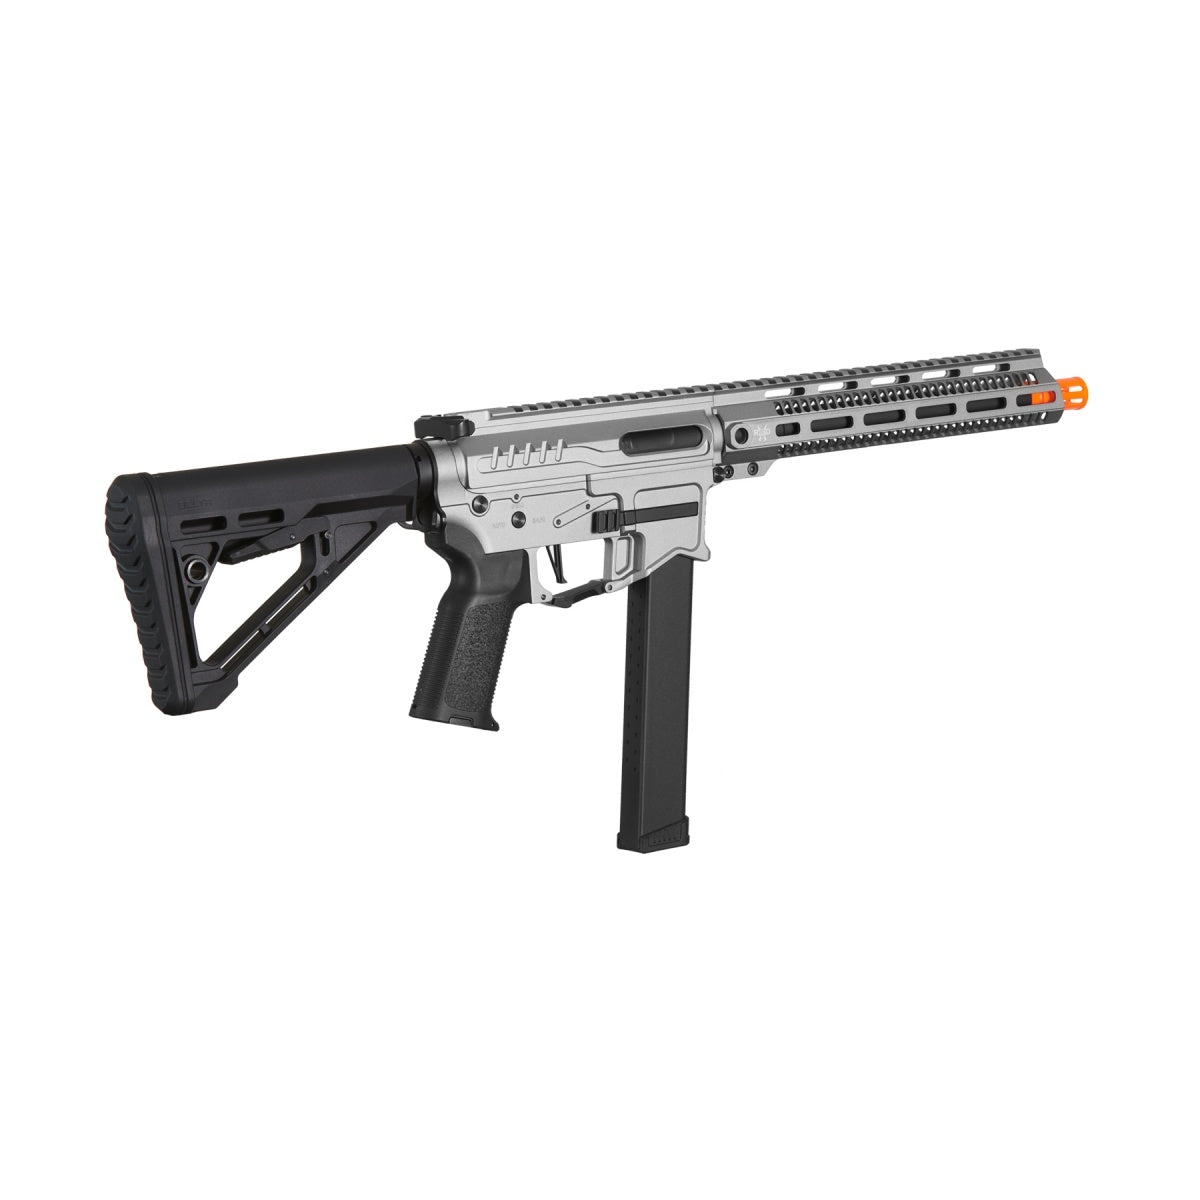 Zion Arms R&D Precision Licensed PW9 Mod 1 Long Rail Airsoft Rifle with Delta Stock - ssairsoft